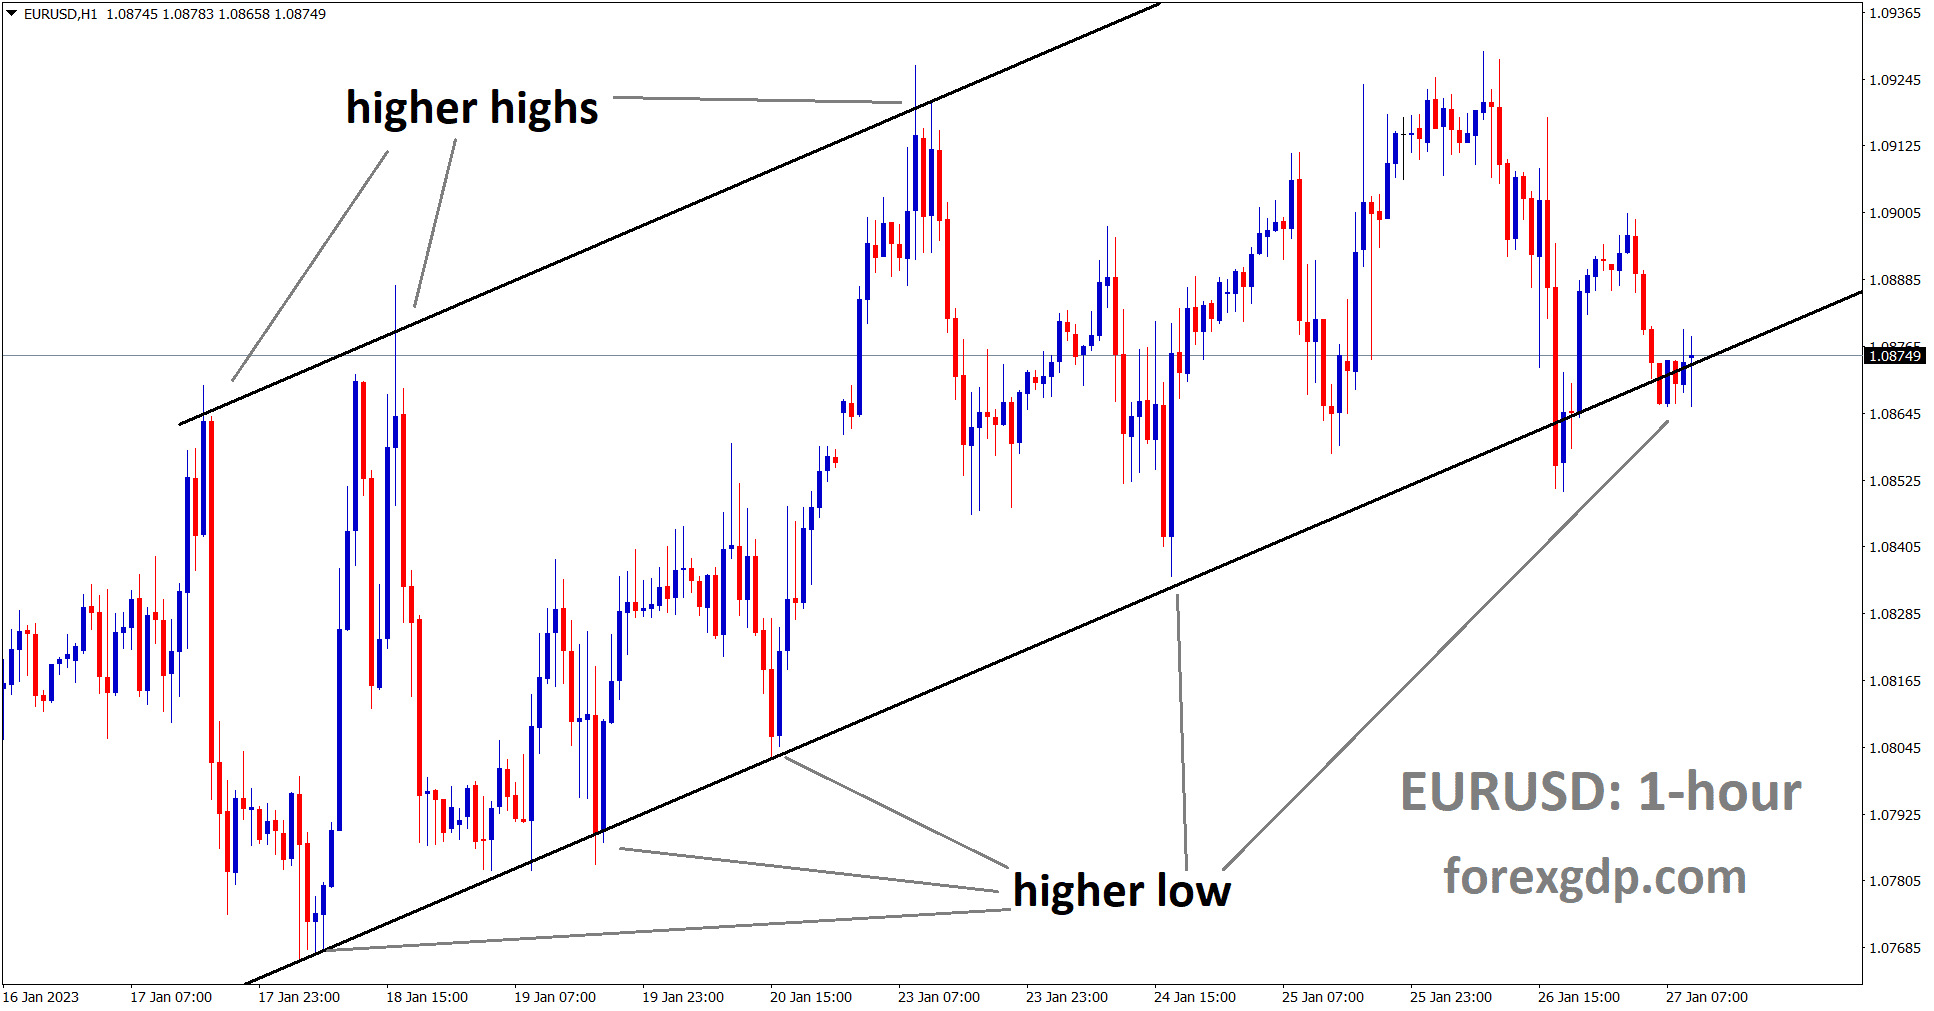 EURUSD is moving in a Ascending channel and the market has reached the higher low area of the channel.